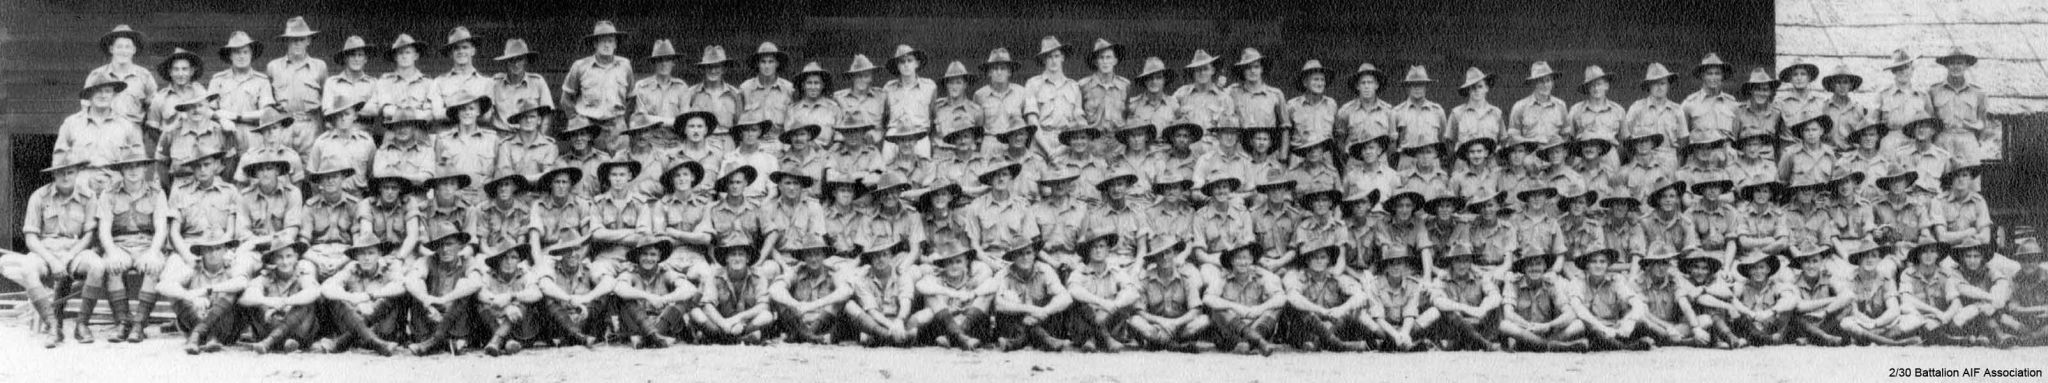 C Company
C Company at Batu Pahat, 1941.

Left to right:

Back row:
1) NX37615 - ANDERSON , Kelvin John Eric (Kel), Pte. - C Coy. 13 Pl. 
2) NX53042 - SIMPSON, John Thomas (Jack), Pte. - B Coy. 12 Pl. WiA Fort Rose, Doi Sonkurai 3 (Dysentery, Toxaemia following Amputation)
3) NX36545 - WILLIAMSON, Clarence, Pte. - C Coy. Doi Sonkurai 3 (Dysentery, Malaria)
4) NX37297 - DAVISON, William Arthur, Pte. - C Coy. to 2/20 Bn 18/10/1941 to join his brother
5) NX36528 - WOOD, Clarence William, Pte. - C Coy. 13 Pl. 
6) NX46619 - KORSCH, John Donald, Cpl. - C Coy. 14 Pl. 
7) NX26495 - McMAHON, Bernard Stanislaus (Stonja), Sgt. - C Coy. 14 Pl. 
8) NX41134 - EATHER, Walter Barnett, Sgt. - C Coy. 15 Pl. 13 Pl - A/A Pl
9) NX37593 - COMMANS, John Poole (Jack), Pte. - C Coy. 15 Pl. WiA Gemas
10) NX29461 - SPRING, Alan Thomas, Pte. - C Coy. KiA St. Andrew's Cathedral, Singapore
11) NX47456 - ROWE, Aubrey Nelson (Jack), A/Cpl. - C Coy. 15A Pl. WiA Fort Rose, Doi Sonkurai 1 (Dysentery, Pneumonia)
12) NX54449 - JONES, George Francis McKenzie (Frank), A/L/Cpl. - C Coy. 15 Pl. 
13) NX47466 - REILLY, Arthur William, Pte. - C Coy. 15 Pl. Doi Kanburi (Dysentery)
14) NX33725 - SANDS, Richard Arthur, Pte. - C Coy. 15 Pl. KiA Gemas
15) NX37680 - HOLMAN, Trevor Ian, Pte. - C Coy. 15 Pl. Doi Sonkurai 3 (Dysentery)
16) NX36483 - WEISS, Harry Blanch, Pte. - C Coy. 13 Pl. WiA Gemas, Doi Sonkurai 3 (Beri Beri)
17) NX36501 - PRATT, James, Pte. - C Coy. Coy. HQ Pl. WiA Gemas, Doi Sonkurai 3 (Dysentery) 
18) NX66981 - DENGATE, Edgar Norman, Lt. - B Coy. O/C 12 Pl. Lt. from 10/11/1941
19) NX37632 - SMEDLEY, Walter Rex, Pte. - C; HQ Coy. 15; Carrier Pl. Driver/Mechanic, Carrier 13; Doi Khorkan
20) NX37476 - GANTLEY, Alfred James, Pte. - BHQ Coy.
21) NX47218 - GRAINGER, Stanley Harold, Pte. - C Coy. 15A Pl. 
22) NX37366 - TOWERS, Keith Lloyd, L/Cpl. - C Coy. 14 Pl. 
23) NX47760 - MARSH, Stanley Frederick, Pte. - C Coy. 14 Pl. Doi Sonkurai 1 (Cholera)
24) NX36535 - RANDLE, Edward R. (Ted/ Snowy), Pte. - A Coy.
25) NX37317 - LANE, Hector Doyle, Pte. - C Coy. WiA Sempang Rengam
26) NX37604 - HILTON, Emanuel Patrick (Mick), Pte. - D Coy. 16 Pl. WiA Gemas
27) NX37733 - JOYCE, Ronald Joseph, Pte. - HQ Coy. Mortar Pl. KiA Ayer Hitam
28) NX15563 - VINCENT, Horace Robert William (Ossie), Pte. - C Coy. 15A Pl. Doi Nieke (Beri Beri, Dysentery, Anaemia)
29) NX59092 - STARK, Reginald, L/Cpl. - C Coy. 14 Pl. to Rose Force 23/12/1941, KiA Sempang Rengam (D Coy area)
30) NX36556 - HOSKINSON, James Charles (Big Jim), Cpl. - C Coy. 13 Pl. Doi Sonkurai 3 (Beri Beri)
31) NX47445 - CRAIG, Archibald John, Pte. - C Coy. 13 Pl. 
32) NX37281 - HAMLIN, Victor Percy (Vic), Pte. - C Coy. 13 Pl. 
33) NX37296 - JONES, Ashley Chave, Pte. - C Coy. 13 Pl. 
34) NX37498 - JACK, Robert William, Sgt. - C Coy. 13 Pl. 
35) NX37304 - CONDIE, Edward Patrick (Ted), Pte. - C Coy. 

Third row:
1) NX53537 - CLYNE, Edward Francis (Ted), S/Sgt. - C Coy. CQMS Pl. Doi Sandakan
2) NX47748 - JOHNSON, George Edward Thomas (Big Johnno), A/U/Sgt. - C Coy. 15A Pl. 
3) NX32334 - SURTEES, Robert Edward James (Bob), L/Sgt. - C Coy. Ord. Room Pl. 
4) NX37951 - MARTIN, Edward Budd, Pte. - C Coy. to MLFDU 17/3/1942
5) NX37607 - CRAM, Jack Gordon, Pte. - BHQ Coy. to AASC 4/10/1941
6) NX4337 - TAYLOR, Blair, Pte. - C Coy. 15 Pl. Rose Force 23/12/41
7) NX36301 - GRIFFITHS, Albert (Nookie), Pte. - C Coy. 15 Pl. 
8) NX36377 - RANDLE, Francis George Edward (Frank), Pte. - C Coy. 15 Pl.
9) NX46643 - REARDON, Francis William (Frank), Pte. - C Company, 15 Platoon (not NX29716 - BLACKER, Cecil Richard, Pte. - C Company)
10) NX26943 - TOPHAM, Frank, Pte. - C Coy. 15 Pl. AAOC Boot repair, Changi
11) NX47544 - SWEENEY, Ronald Lennox (Rogo), L/Cpl. - C Coy. 15 Pl. 
12) NX47009 - QUIRK, William George, Pte. - C Coy. 15 Pl. Doi Tanbaya (Beri Beri, Dysentery)
13) NX36487 - STEVENS (Stephens), Thomas, Pte. - C Coy. 15 Pl. 
14) NX7248 - MAY, Frederick George (Fred), Pte. - C Coy. 15 Pl. Ex "A" Force; sent from Thailand to Japan after Railway completed; Rakuyo Maru torpedoed and sunk 12/9/1944 by US submarine
15) NX53747 - SHAW, Mervyn David, Pte. - C Coy. Coy. HQ Pl. Doi Sonkurai 1 (Cholera)
16) NX36479 - HOLLOWAY, Maxwell George, Pte. - C Coy. 14 Pl. MiA 12/2/1942
17) NX37335 - JENKINS, Edward Rossborough Melbourne (Bernie), L/Cpl. - C Coy. 13 Pl. Doi Tanbaya (Beri Beri)
18) NX915 - EDWARDS, Frederick Henry, Pte. - Repatriated 15/01/1942
or 18)	NX46920 - HEDWARDS, Cornelius Michael (Con), Pte. - C Company, 14 Platoon
19) NX51236 - LAWSON, Robert George, Pte. - C Coy. 14 Pl. 
20) NX55473 - O'DONNELL, Colin Squire (Col), Sgt. - C Coy. 15 Pl. 
21) NX47752 - NEWMAN, Robert John (Bob), Pte. - C Coy. 14 Pl. 
22) NX37538 - LITTLEJOHN, George Ernest, Pte. -  to 27 Bde 7/10/1941
23) NX47154 - MACOURT, Laurie Leo, Pte. - C Coy. 14 Pl. Doi Kanburi (Lobar Pneumonia)
24) NX47498 - GRANT, Thomas Bertram (Tom ), L/Cpl. - C Coy. 14 Pl. 
25) NX37705 - O'ROURKE, Terence Percival (Terry), Pte. - C Coy. 14 Pl. 
26) NX37702 - BICKNELL, Thomas John, L/Cpl. - C Coy. 15A Pl. 
27) NX46605 - McEWEN, Charles, Pte. - C Coy. 14 Pl. WiA Sempang Rengam
28) NX46640 - PHILP, Sydney Phillip, Pte. - C Coy. 14 Pl. Doi Sonkurai 1 (Cholera)
29) NX46603 - McKENZIE, Donald (Don), L/Cpl. - C Coy. 14 Pl. 
30) NX46983 - McLAREN, Hilton Stanley, Pte. - C Coy. 15A Pl. WiA Sempang Rengam
31) NX55568 - CONEN, Sidney Graham (Sid), Pte. - C Company, 14 Platoon 
32) NX50287 - LE CLERCQ, Alan Edward, Pte. - C Coy. 13 Pl. Doi Sandakan
33) ? - OSBORN, E.G.
34) NX27012 - SCHOFIELD, Phillip Alfred (Schoey), WO2 - C Coy. CSM Pl. MiD; took over driving of C Coy truck after Tom PEARCE killed at Gemas

Second row:
1) NX37374 - THORBURN, Archibald John Kennedy (Arch), A/U/L/Sgt. - C Coy. Coy. HQ Pl. 
2) NX37666 - MAY, Eric Francis (Bunny), Pte. - C Coy. Coy. HQ Pl. 
3) NX57422 - RILEY, Neville Thomas, Pte. - HQ Coy. Carrier Pl. Gunner, Carrier 13
4) NX47871 - WALLIS, Edmund Winston (Punter), Pte. - C Coy. 15 Pl. 
5) NX36510 - COX, Allan Ray, Pte. - C Coy. 15 Pl. WiA Gemas, Doi Sonkurai 1 (Cholera)
6) NX37558 - MOHR, Frank Arthur, Pte. - C Coy. 15 Pl. MiA 28/1/1942
7) NX54468 - ENNIS, William, A/Sgt. - C Coy. 15 Pl. WiA Sungei Seletar
8) NX50333 - NUGENT, Mervyn Cecil, A/U/Cpl. - C Coy. 15 Pl. 
9) NX47004 - ROCKETT, Thomas, Cpl. - C Coy. 15 Pl. 
10) NX37616 - DICKINSON, Archibald James, Pte. - C Coy. 15 Pl. 
11) NX29283 - JENNINGS, Edward Henry, Sgt. - C Coy. 15 Pl. KiA Sempang Rengam
12) NX16090 - DENTON, Cyril Roy, Pte. - C Coy. 15 Pl. Doi Sonkurai 3 (Dysentery)
13) NX37614 - WITHERS, Dudley James, Pte. - to 8 Div. Sigs. 10/11/1941, MpD
14) NX37583 - KIELY, Thomas Joseph, Pte. - C Coy. to 27 Bde 7/10/1941, Doi Tamaranpah (Cholera)
15) NX33393 - PEGRUM, Reginald Oliver, Pte. - A Coy. to 2/20 Bn 18/10/1941
16) NX37542 - SAVAGE, Alfred Gordon (Gordon), Pte. - C Coy. 15A Pl. 
17) NX32588 - CLEMENS, Percival Webster (Mick), Lt. - C Coy. O/C 13 Pl. KiA Gemas
18) NX70458 - MASTON, Ronald Harry (Bomb Happy), Capt. - C Coy. 2 l/c C Coy. 
19) NX34738 - LAMACRAFT, Alfred Howard Maudslay, Capt. - C Coy. O/C C Coy. E.D.
20) NX34950 - PARSONS, Ernest John (John), Lt. - C Coy. O/C 14 Pl. 
21) NX70690 - CLAYTON, Hedley Stanley (Basher Bill), Lt. - C Coy. O/C 15 Pl. WiA Fort Rose
22) NX36536 - RANDLE, Ernest Harold, Pte. - A Coy. 7 Pl. WiA Tyersall Palace 
23) NX46620 - KRUSE, Bruce Edward, Pte. - C Coy. 14 Pl. 
24) NX69350 - MITCHELL, Jack (John Earl) (Jack), Pte. - C Coy. 14 Pl. 
24) NX72254 - BRENNAN, Reginald Ivan (Reg), Pte. - BHQ Coy. D&P Pl.
25) NX37312 - WILSON, John Whiteman, Pte. - C Coy. 13 Pl. WiA Mandai Rd., MpD
26) NX47787 - DONNELLY, Clifford Gerald, Pte. - C Coy. to 2/20 Bn 18/10/1941
27) NX37282 - COULTAS, Stanley Thomas (Stan), Pte. - C Coy. 14 Pl. 
28) NX37294 - FORWARD, Kenneth (Frank Walter Leslie) (Ken), Pte. - C Coy. 13 Pl. 
29) NX47104 - KITCHENER, Izra James (Jim), Pte. - C Coy. 14 Pl. Doi Kanburi (Beri Beri)
30) NX47801 - HARRINGTON, Ernest Clarence, Pte. - HQ Coy. Carrier Pl. MpD Singapore Island
31) NX4410 - BYRNE, Neal Broughton Grey, Pte. - C Coy. 15A Pl. Doi Sandakan
32) NX37388 - FINN, James Allen, Pte. - C Coy. 14 Pl. Doi Sandakan
33) NX47377 - FLANAGAN, Frederick Robert, Pte. - C Coy. 13 Pl. 
34) NX2538 - JOHNSTON, Ronald Athol, Cpl. - C Coy. 14 Pl. 
35) NX37305 - KENTWELL, Ronald (Popeye), Pte. - C Coy. 13 Pl. 
36) NX37575 - MITCHELL, Bruce, Cpl. - C Coy. 13 Pl. Doi Kanburi (Post Dysentery)

Front row:
1) NX47925 - RANKIN, Charles William (Bill), Pte. - C Coy. 14 Pl. Doi Sandakan
2) NX37308 - GILL, Leslie Bede (Curlie), Pte. - C Coy. 13 Pl. 
3) NX24742 - CHIPPS, Ronald Lawrence, Pte. - C Coy. 15 Pl. WiA Sempang Rengam
4) NX2712 - WEBBER, Harry George, L/Cpl. - C Coy. 15 Pl. 
5) NX36532 - FOWLER, Keith Allen (Chook), Pte. - C Coy. 15 Pl. WiA Gemas
6) NX26185 - BUTT, Frederick George (Fred), A/Sgt. - C Coy. 15 Pl. WiA Sempang Rengam
7) NX59062 - BUTT, Edward William Bartlett (Ted), Cpl. - C Coy. 15 Pl. Doi Sonkurai 3 (Malaria, Dysentery, Heart Failure)
8) NX47008 - SILVER, Frank Michael, Pte. - C Coy. 15 Pl. 
9) NX36493 - HANNA, Rupert Clyde, Cpl. - C Coy. 15 Pl. Doi Kanburi (Cardiac Beri Beri)
10) NX47542 - SMALL, Mervyn Lindsay (Jimmy), Pte. - C Coy. 15 Pl. Drove out one of the C Coy trucks from Gemas
11) NX47702 - CAVANAUGH, Charles, Pte. - C Coy. MpD Gemas
12) NX17253 - LANE, John Charles (Dinny), Pte. - C Coy. 14 Pl. 
13) NX37561 - BLACK, Donald Wrixon (Don), Pte. - C Coy. 13 Pl. WiA Mandai Rd, also B.C.O.F.
14) NX47453 - THOMPSON (Eugarde), Frederick George (Percival) (Percy), Cpl. - C Coy. 13 Pl. 
15) NX37631 - KNOX, Raymond Charles (Andy), Pte. - C Coy. 14 Pl. 
16) NX57774 - JOHNSON, Timothy, Pte. - C Coy. 13 Pl. Doi Sonkurai 3 (Cerebral Malaria)
17) NX59028 - ERRINGTON, Harry Ronald, Pte. - C Coy. 13 Pl. Doi 105K Burma
18) NX55420 - POLLARD, Leonard Ferris, Pte. - C Coy. Coy. HQ Pl. Doi Khorkan (Tropical Ulcers, Dysentery)
19) NX38682 - McDOUGALL, Eldred Ernest (Jock), A/U/Sgt. - C Coy. 15A Pl. 
20) NX37608 - LEE, Arthur, Pte. - HQ Coy. Sig. Pl. to 2/19 Bn 2/2/1943 to join Brother-in-law NX19873 BURNS, Walter John (Wally); D Force S Bn, then Japan
21) NX47351 - DARE, Thomas Lionel, A/Cpl. - C Coy. 13 Pl. 
22) NX36533 - WEBSTER, Sidney Linden, Pte. - D Coy. KiA Mandai Rd.
23) NX47295 - EAREA, Harry James Manning, L/Cpl. - C Coy. 13 Pl. Doi Kanburi (Dysentery, Beri Beri)
24) NX47207 - LACEY, Kenneth James, L/Cpl. - C Coy. 13 Pl. 
25) NX47279 - BREESE, John Frederick, Pte. - C Coy. 13 Pl. Doi Sonkurai 1 (Dysentery, Peritonitis)
26) NX47209 - KENNEDY, Thomas Joseph Frederick (Tom), A/U/Sgt. - C Coy. 14 Pl. 
27) NX37588 - FERGUSON, Ronald John, Pte. - C Coy. 14 Pl. KiA Sempang Rengam
28) NX27652 - LARKING, Cecil James (House Detective), Pte. - HQ Coy. Sig. Pl.
Keywords: NX7248MAY